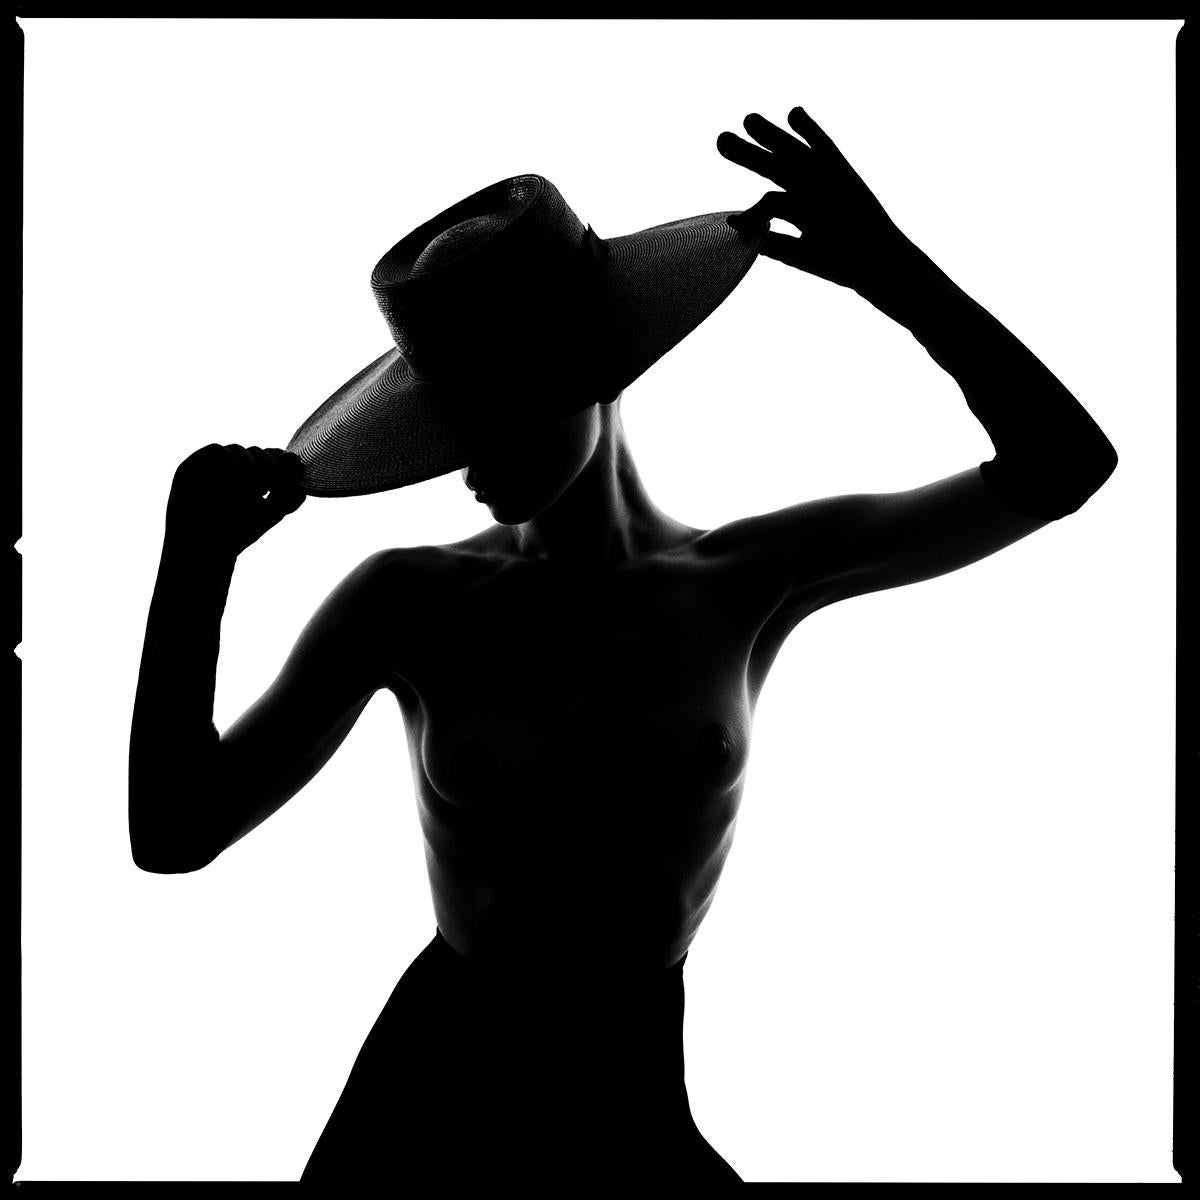 Tyler Shields - Hat Silhouette, Photography 2020